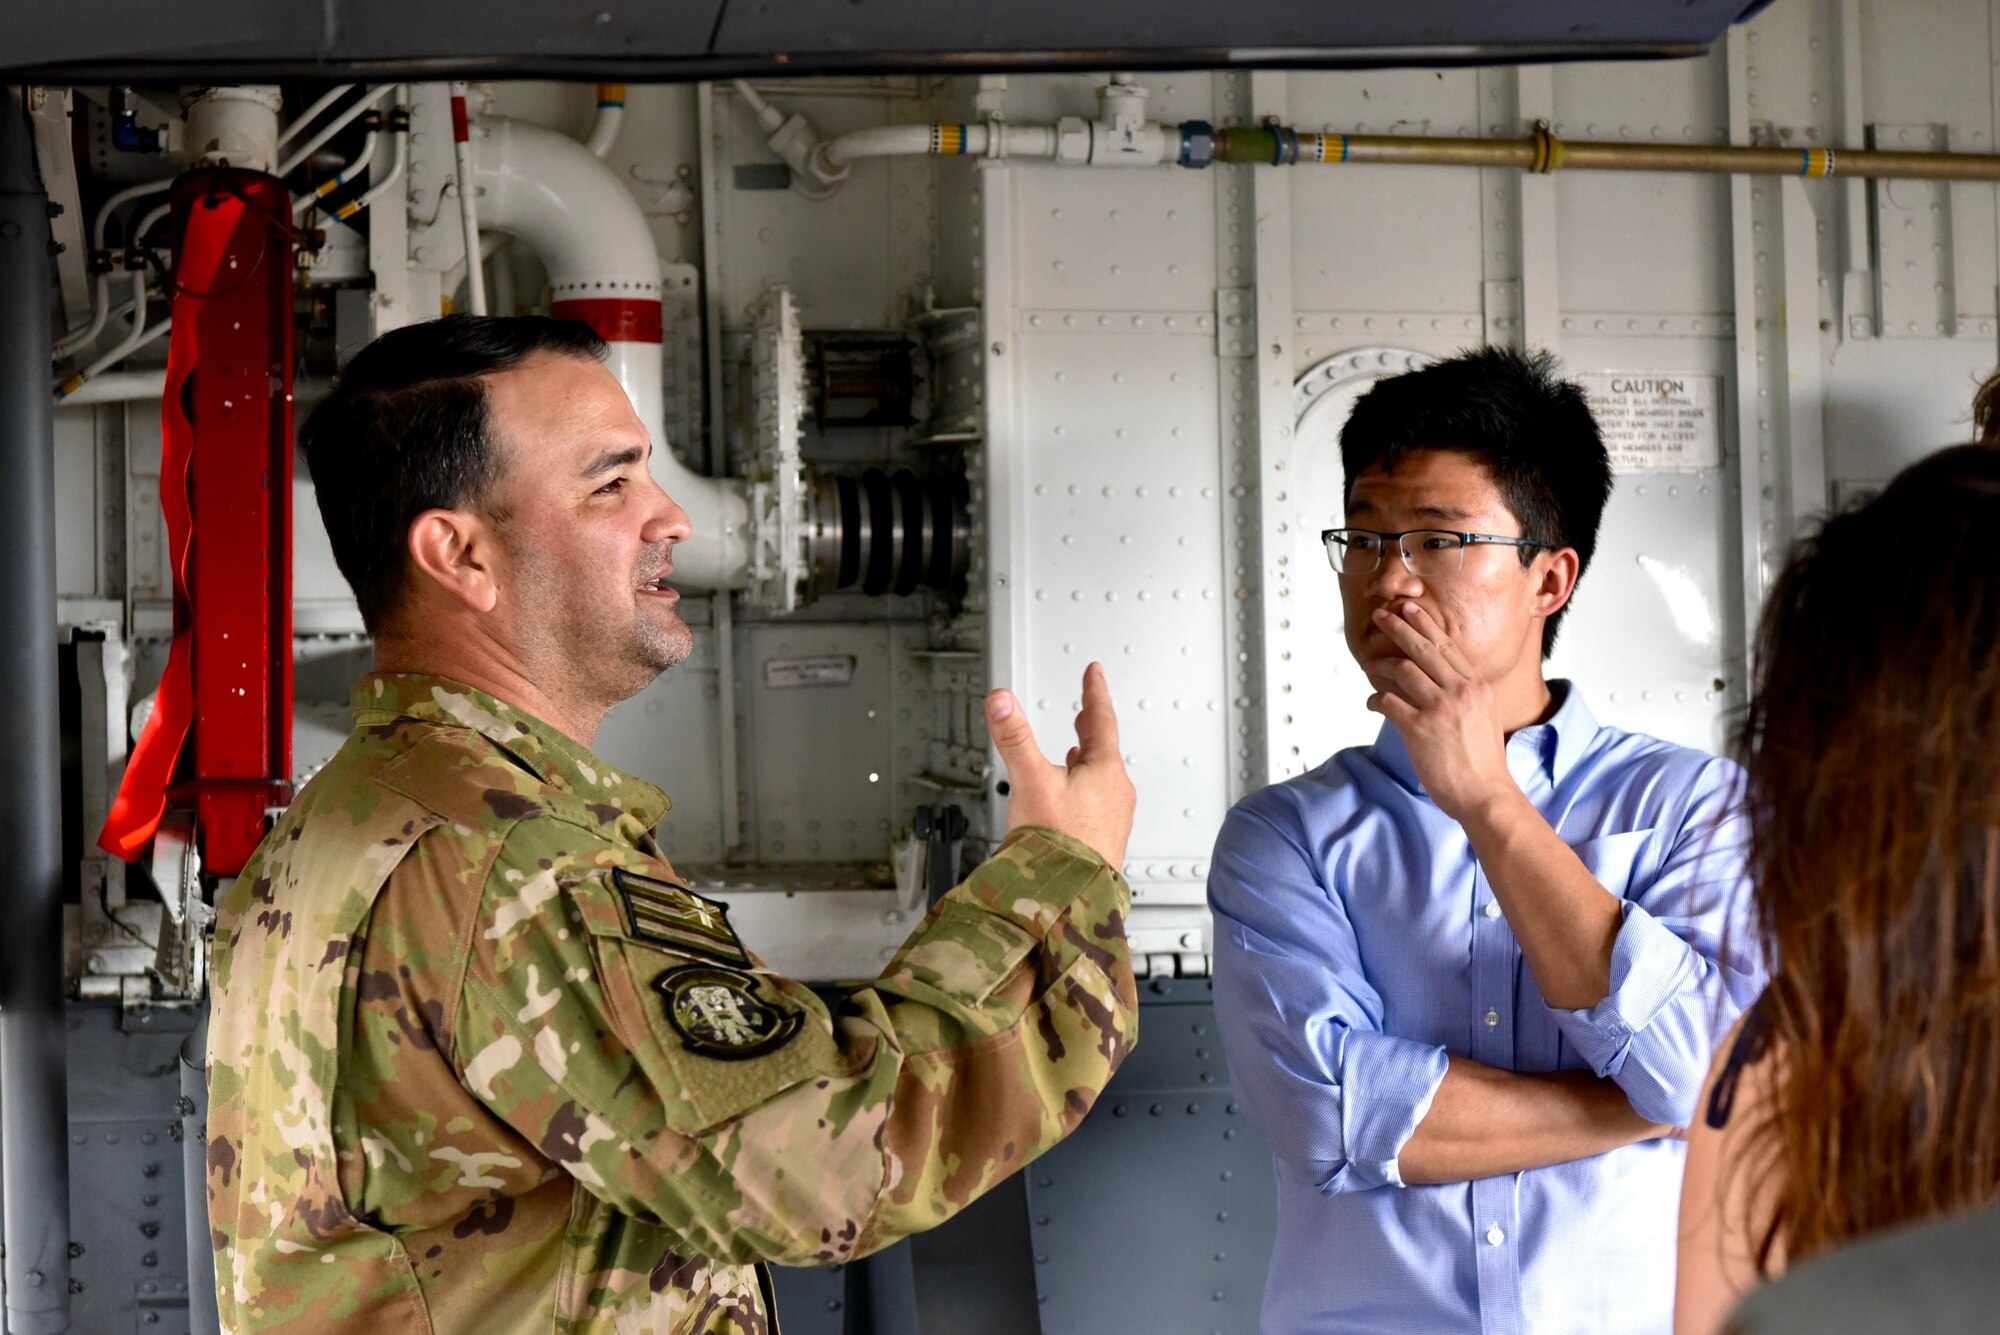 Tech. Sgt. Anthony Victorino, 203rd Air Refueling Squadron boom operator, talks about the KC-135 Stratotanker’s capabilities with students from the Duke University Grand American Strategy Program during a base visit at Joint Base Pearl Harbor-Hickam, Hawaii, March 10, 2022. Students had the opportunity to tour a C-17, a KC-135, and an F-22 static while touring JBPHH to learn more about its role in the Indo-Pacific.
(U.S. Air Force photo by 1st Lt. Benjamin Aronson)